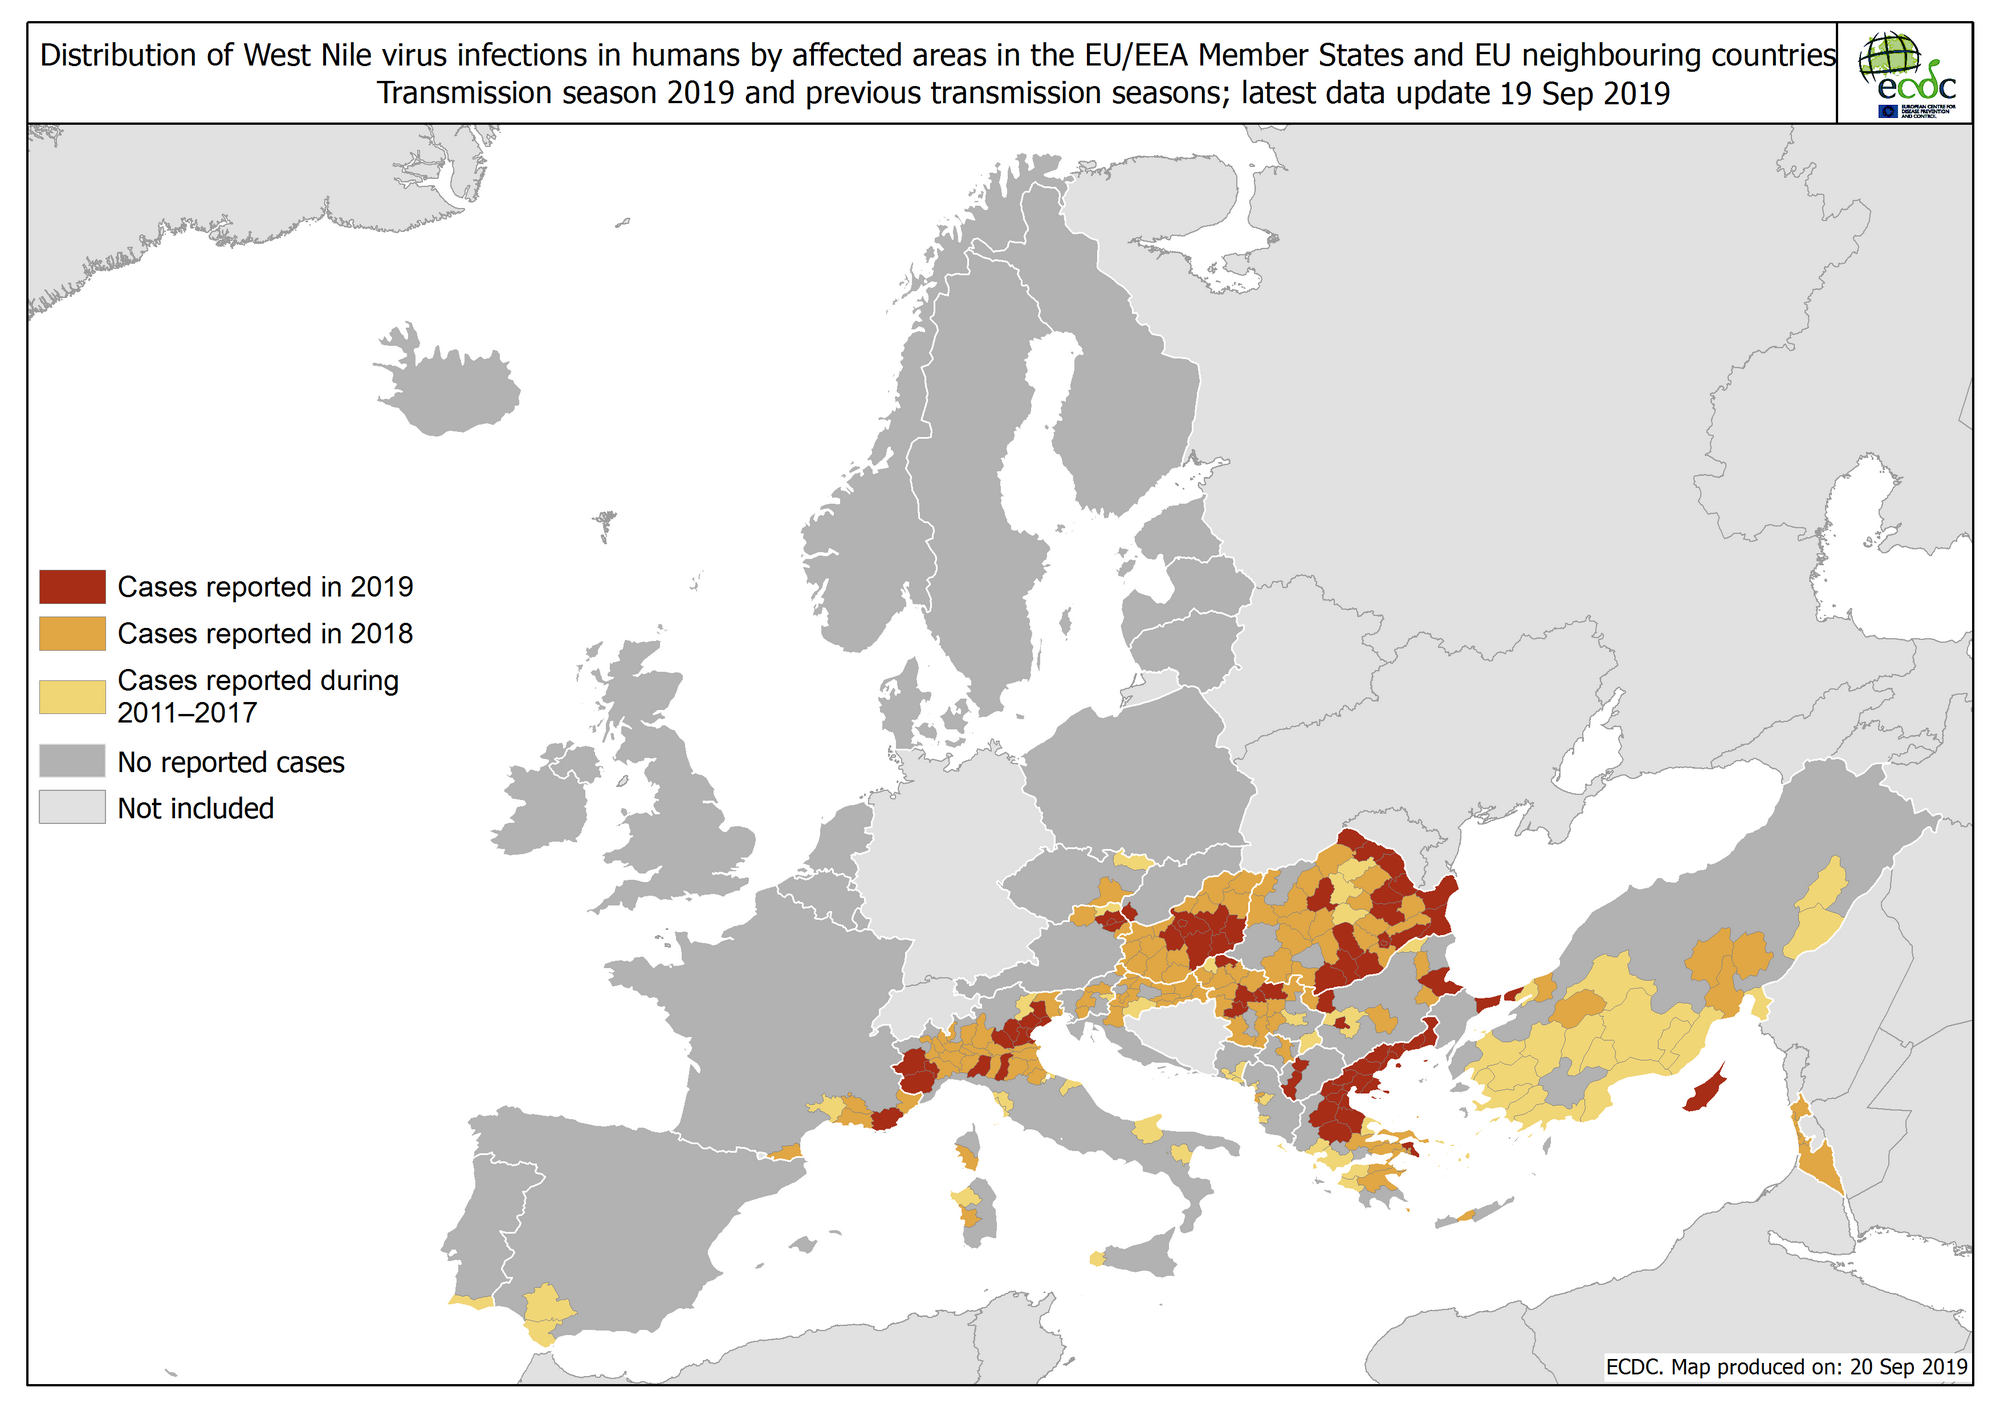 West Nile virus in Europe in 2019 - human cases compared to previous seasons, updated 20 September